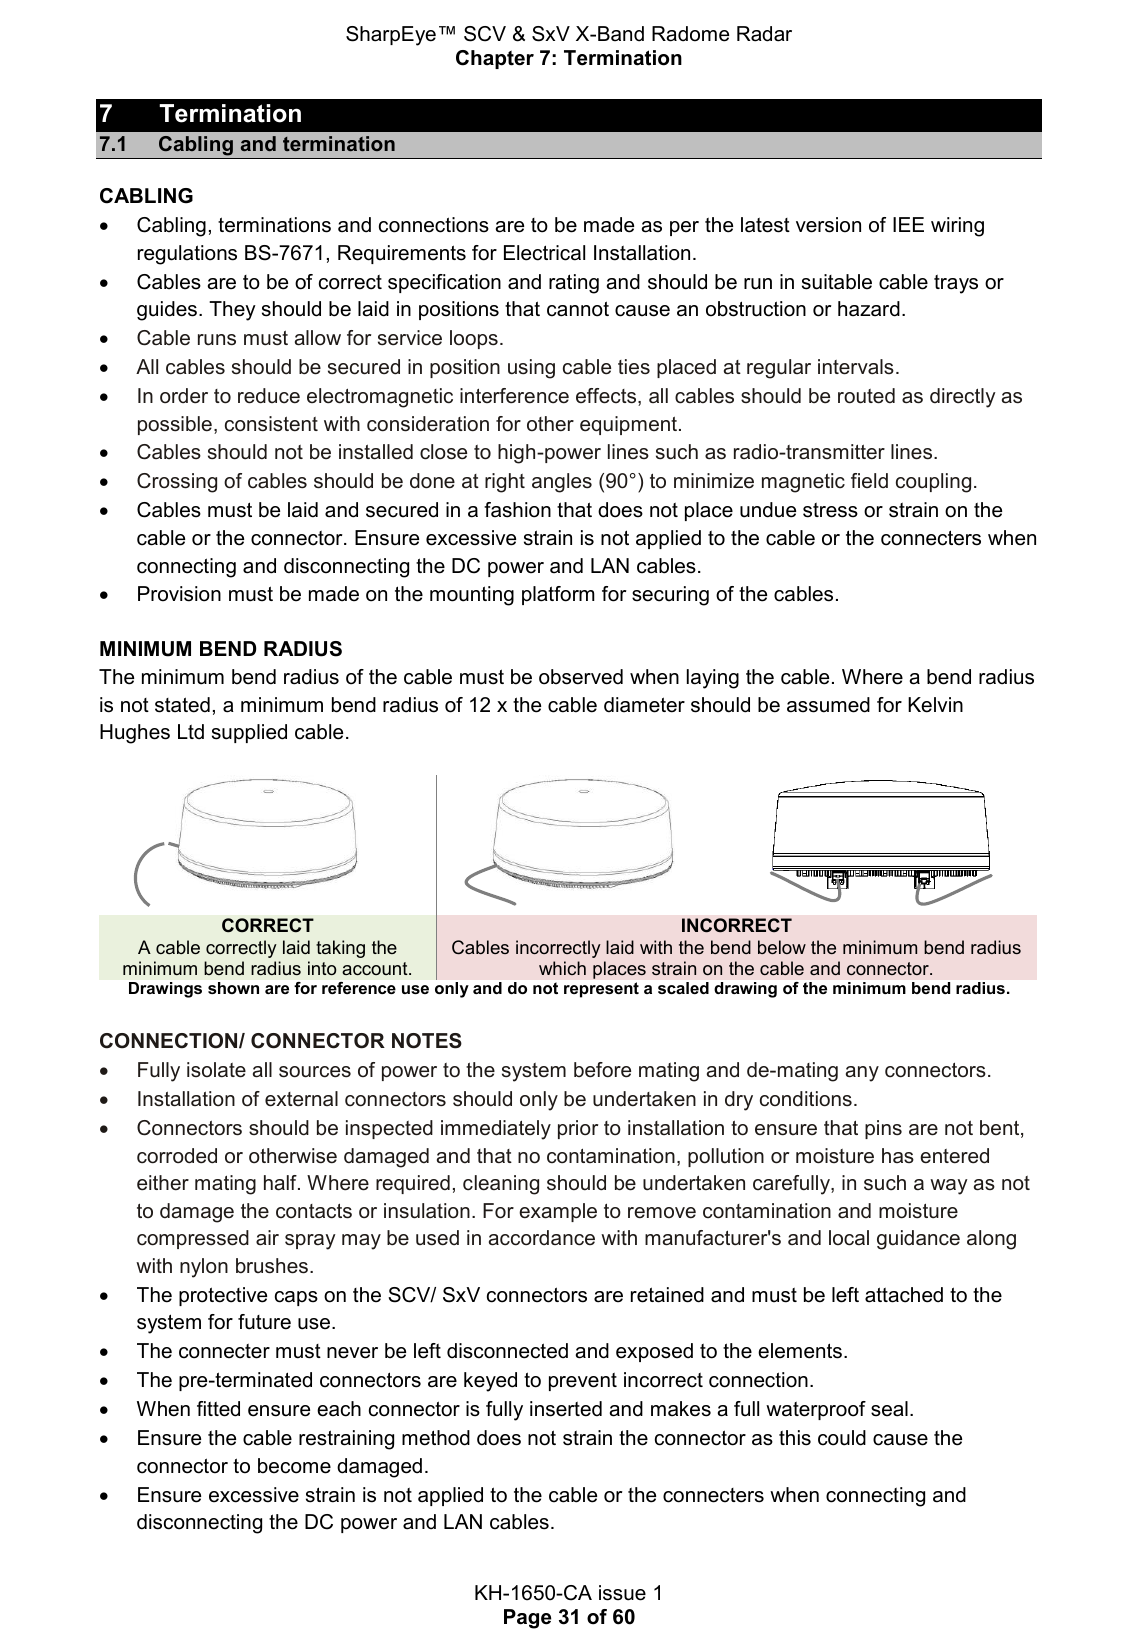 SharpEye™ SCV &amp; SxV X-Band Radome Radar Chapter 7: Termination  KH-1650-CA issue 1 Page 31 of 60 7  Termination 7.1  Cabling and termination CABLING   Cabling, terminations and connections are to be made as per the latest version of IEE wiring regulations BS-7671, Requirements for Electrical Installation.   Cables are to be of correct specification and rating and should be run in suitable cable trays or guides. They should be laid in positions that cannot cause an obstruction or hazard.  Cable runs must allow for service loops.  All cables should be secured in position using cable ties placed at regular intervals.   In order to reduce electromagnetic interference effects, all cables should be routed as directly as possible, consistent with consideration for other equipment.   Cables should not be installed close to high-power lines such as radio-transmitter lines.  Crossing of cables should be done at right angles (90°) to minimize magnetic field coupling.   Cables must be laid and secured in a fashion that does not place undue stress or strain on the cable or the connector. Ensure excessive strain is not applied to the cable or the connecters when connecting and disconnecting the DC power and LAN cables.    Provision must be made on the mounting platform for securing of the cables.   MINIMUM BEND RADIUS The minimum bend radius of the cable must be observed when laying the cable. Where a bend radius is not stated, a minimum bend radius of 12 x the cable diameter should be assumed for Kelvin Hughes Ltd supplied cable.       CORRECT A cable correctly laid taking the minimum bend radius into account. INCORRECT Cables incorrectly laid with the bend below the minimum bend radius which places strain on the cable and connector. Drawings shown are for reference use only and do not represent a scaled drawing of the minimum bend radius.  CONNECTION/ CONNECTOR NOTES   Fully isolate all sources of power to the system before mating and de-mating any connectors.   Installation of external connectors should only be undertaken in dry conditions.    Connectors should be inspected immediately prior to installation to ensure that pins are not bent, corroded or otherwise damaged and that no contamination, pollution or moisture has entered either mating half. Where required, cleaning should be undertaken carefully, in such a way as not to damage the contacts or insulation. For example to remove contamination and moisture compressed air spray may be used in accordance with manufacturer&apos;s and local guidance along with nylon brushes.   The protective caps on the SCV/ SxV connectors are retained and must be left attached to the system for future use.    The connecter must never be left disconnected and exposed to the elements.   The pre-terminated connectors are keyed to prevent incorrect connection.   When fitted ensure each connector is fully inserted and makes a full waterproof seal.   Ensure the cable restraining method does not strain the connector as this could cause the connector to become damaged.    Ensure excessive strain is not applied to the cable or the connecters when connecting and disconnecting the DC power and LAN cables. 